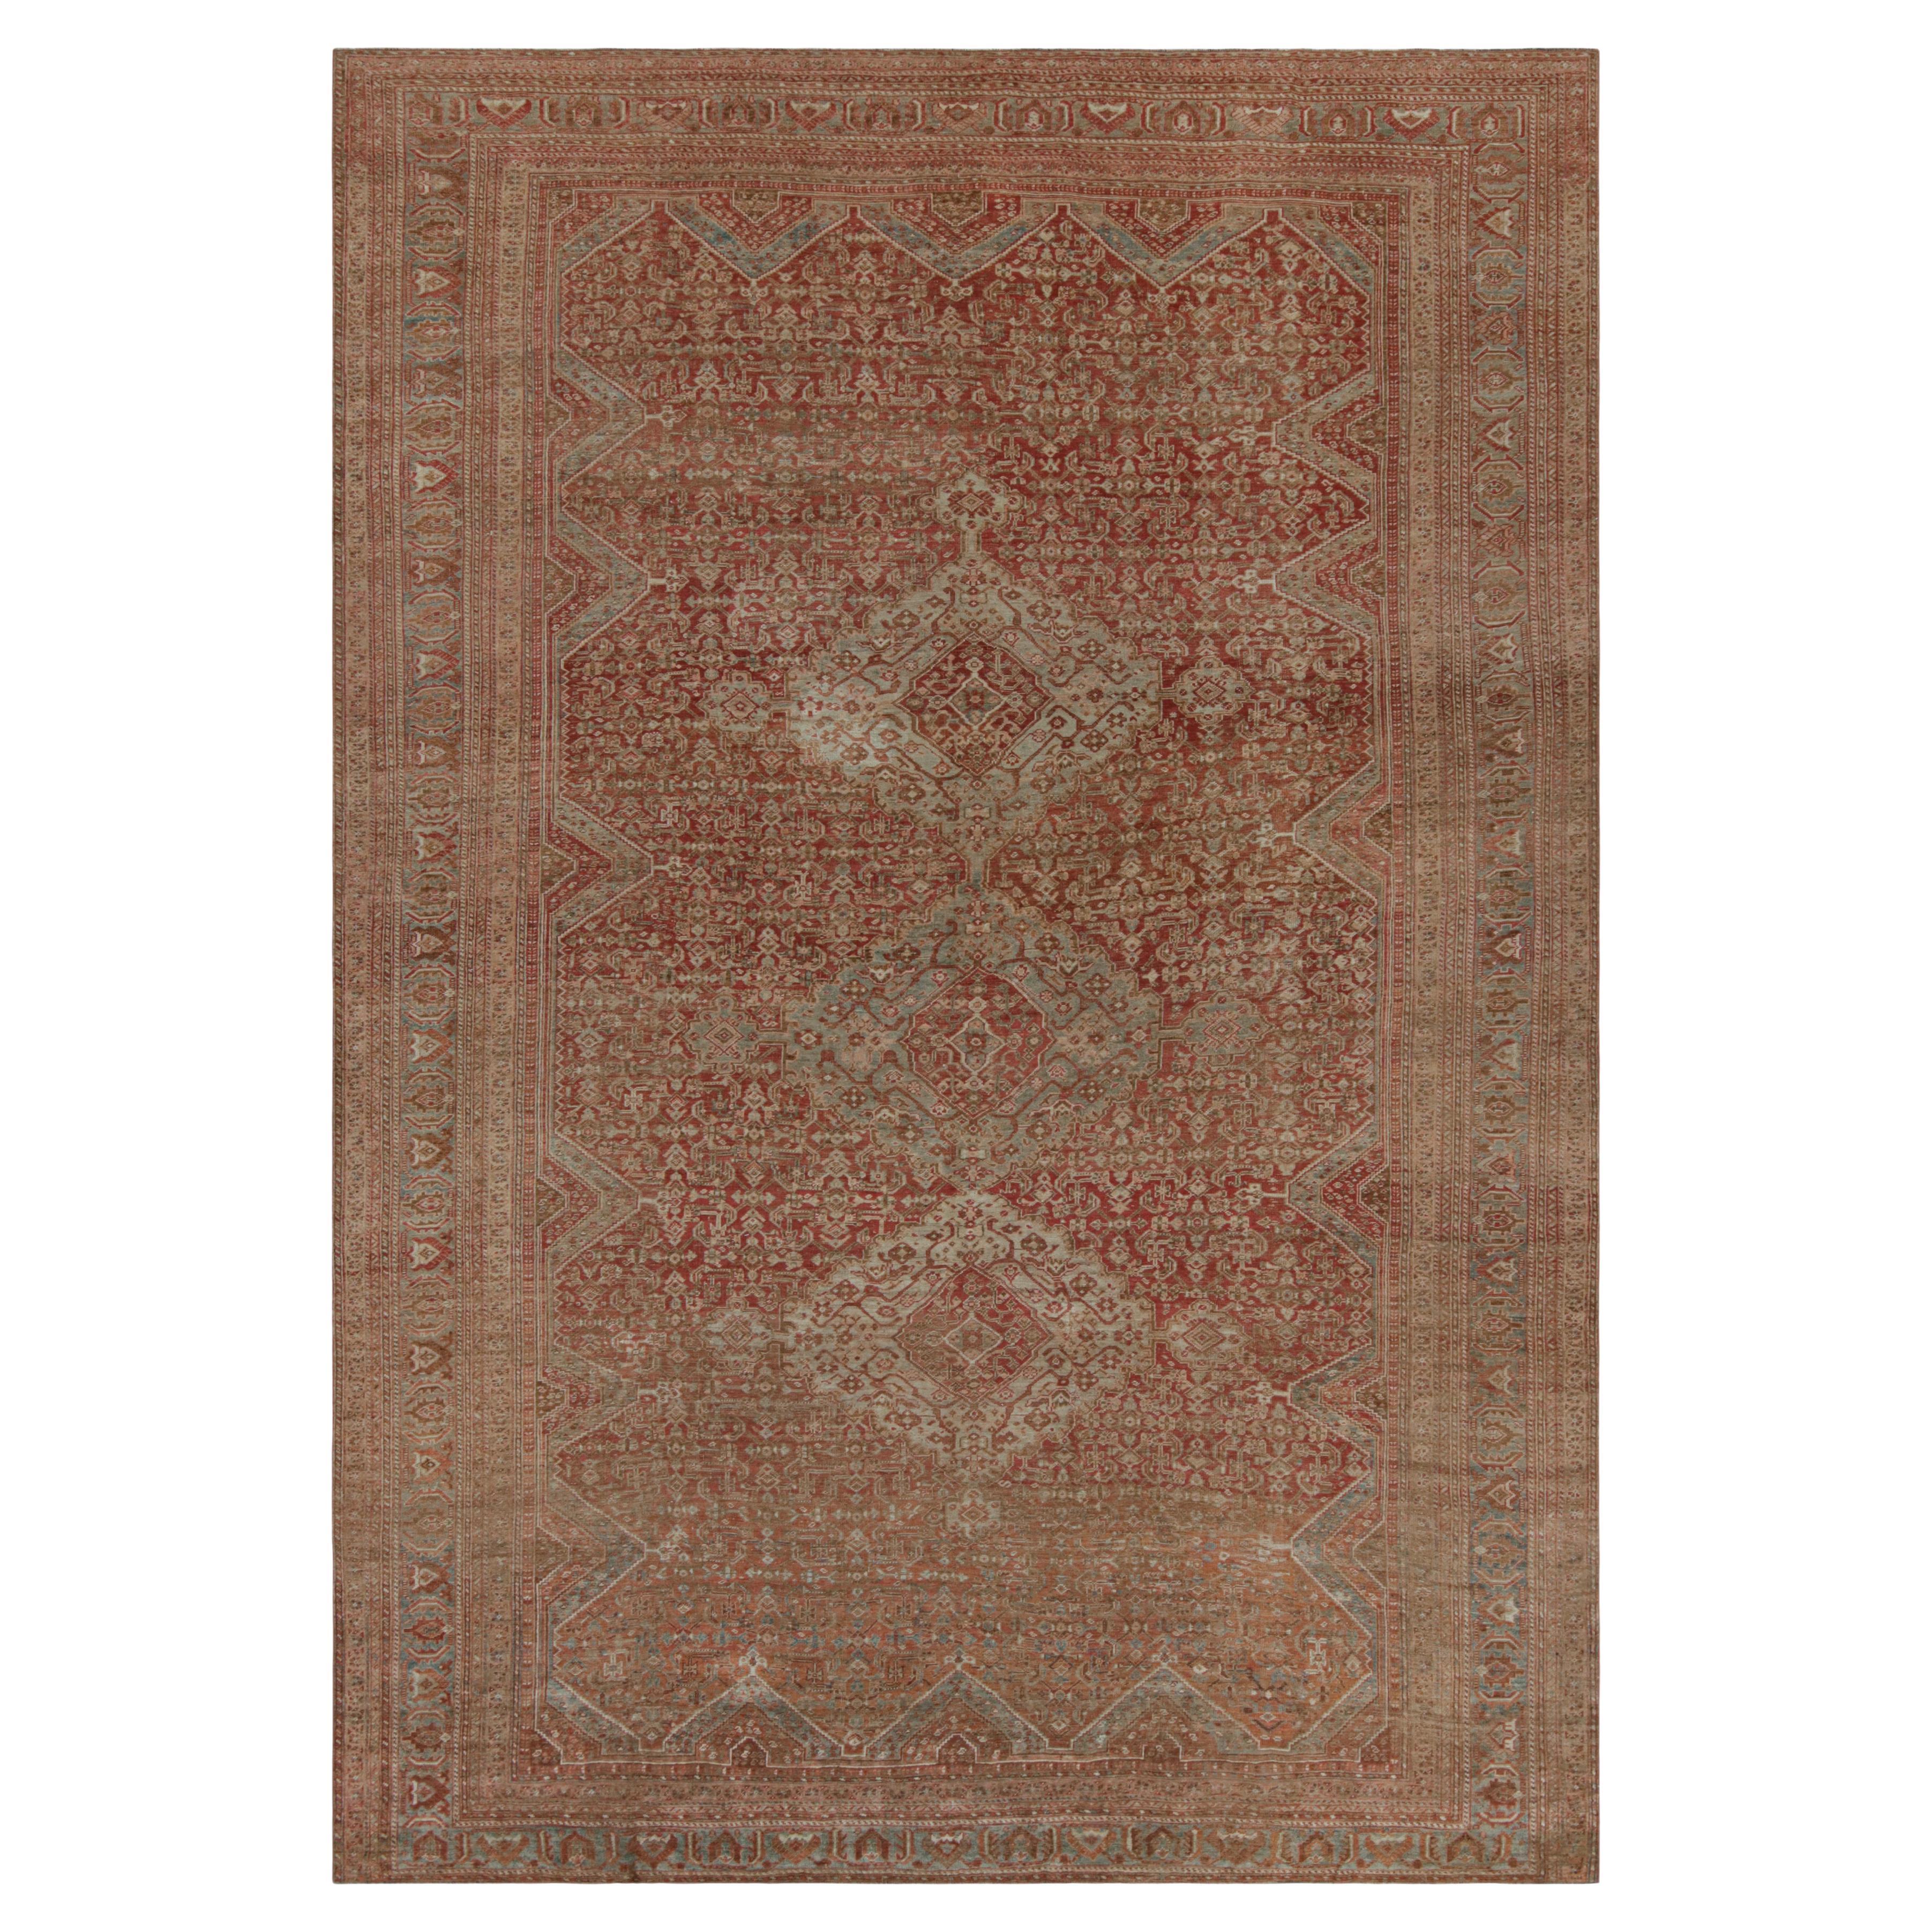 Vintage Bakhtiari-Style Rug in Red with Geometric Patterns, from Rug & Kilim For Sale